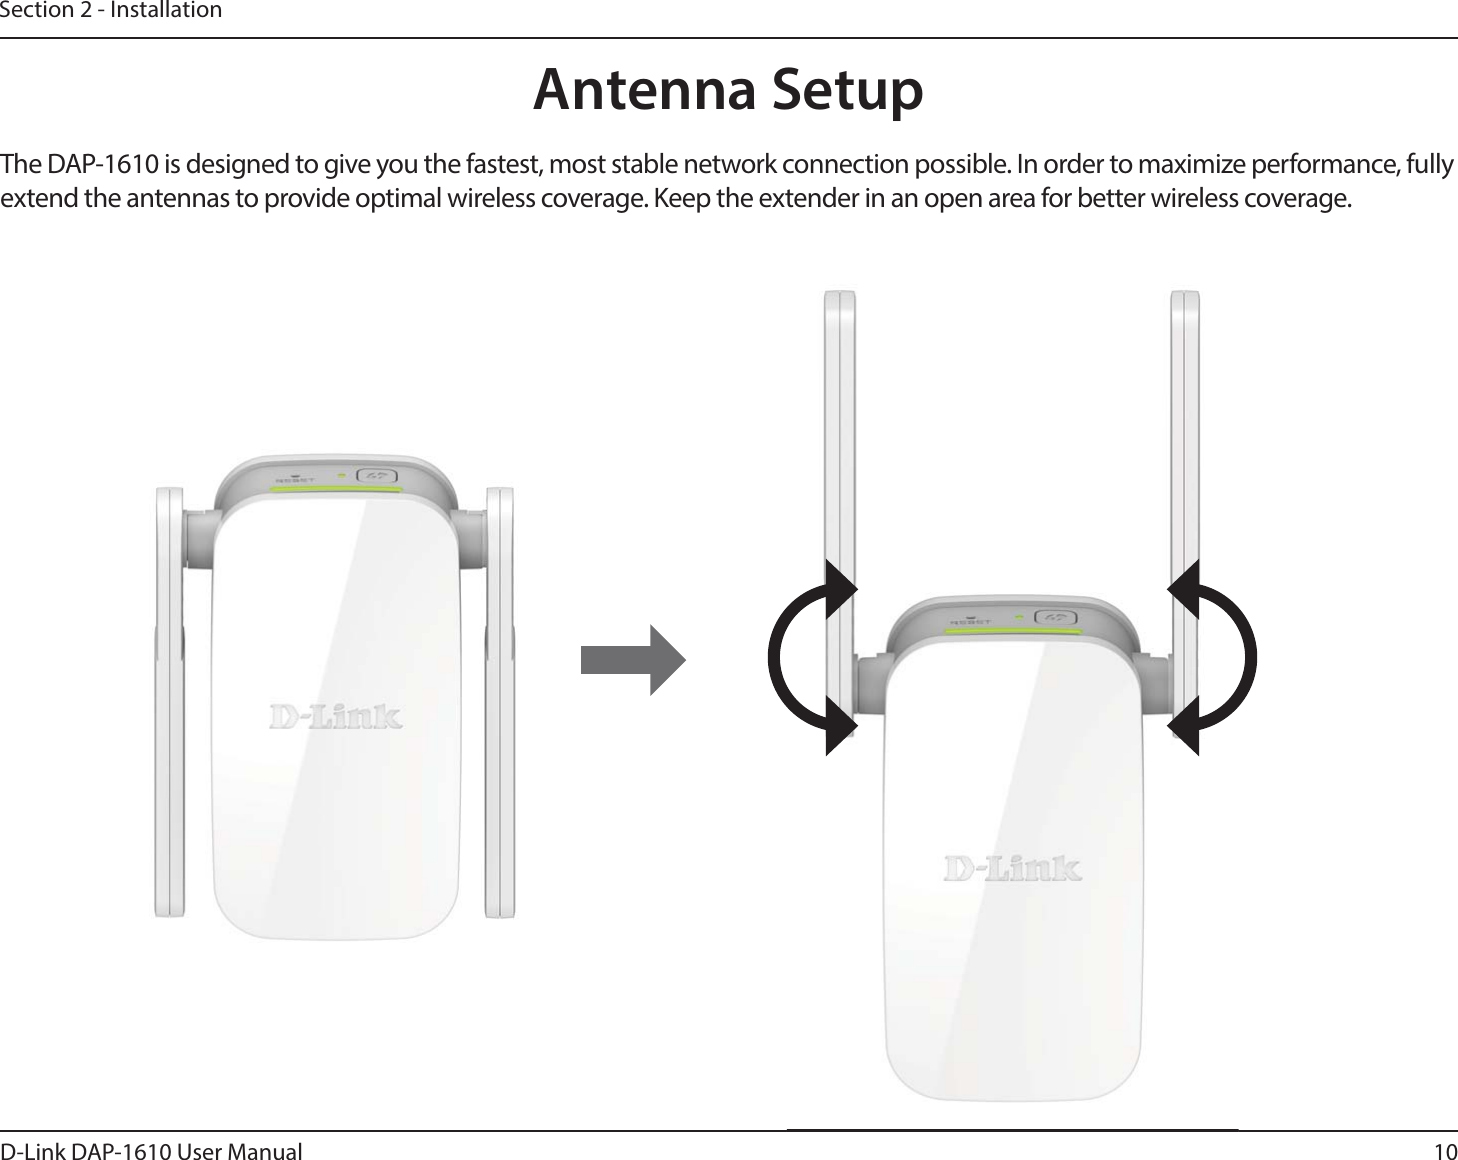 10D-Link DAP-1610 User ManualSection 2 - InstallationAntenna SetupThe DAP-1610 is designed to give you the fastest, most stable network connection possible. In order to maximize performance, fully extend the antennas to provide optimal wireless coverage. Keep the extender in an open area for better wireless coverage. 